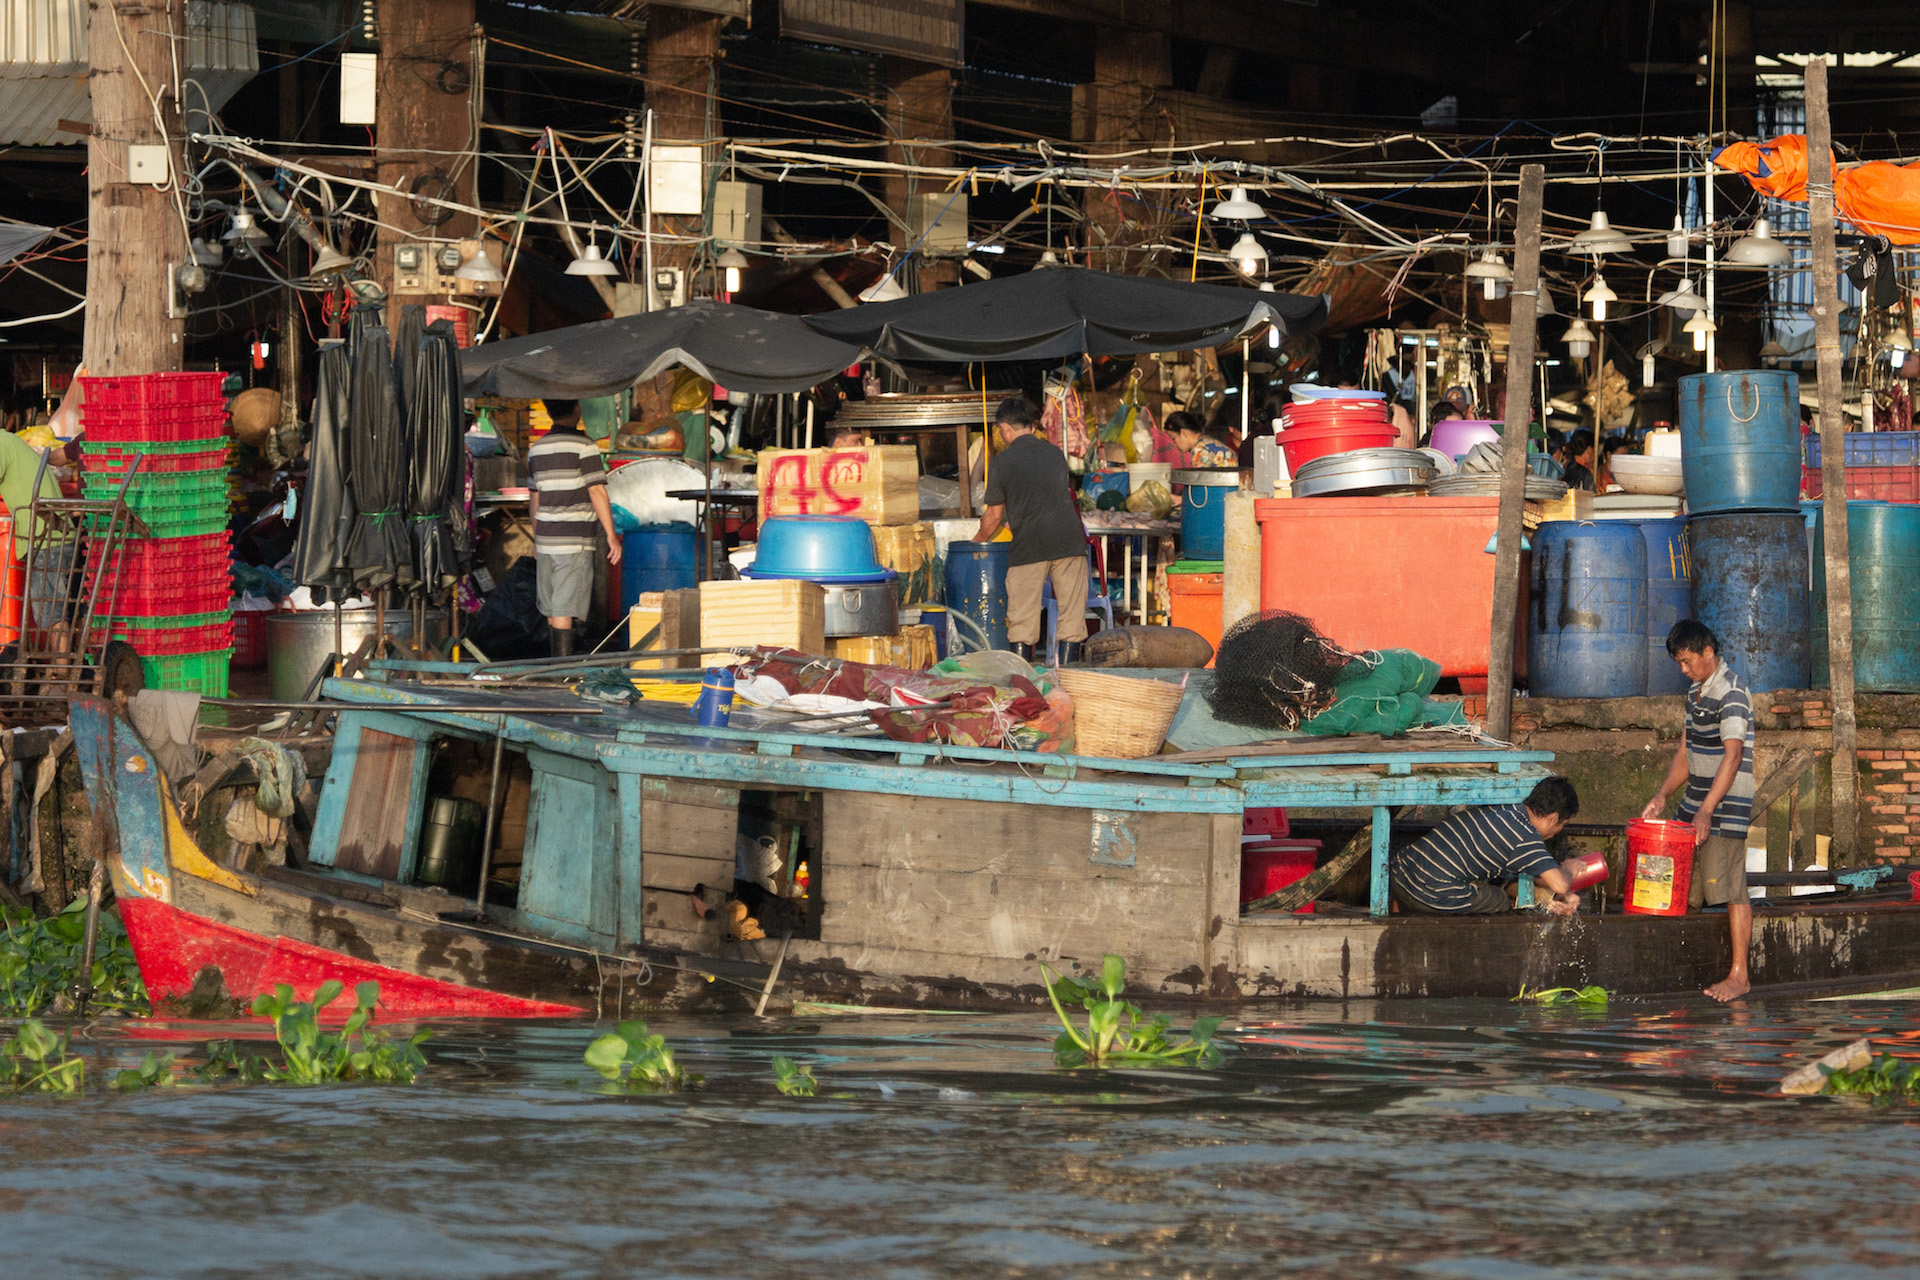 A group of vendors handle their goods with a boat sitting nearby on the water.